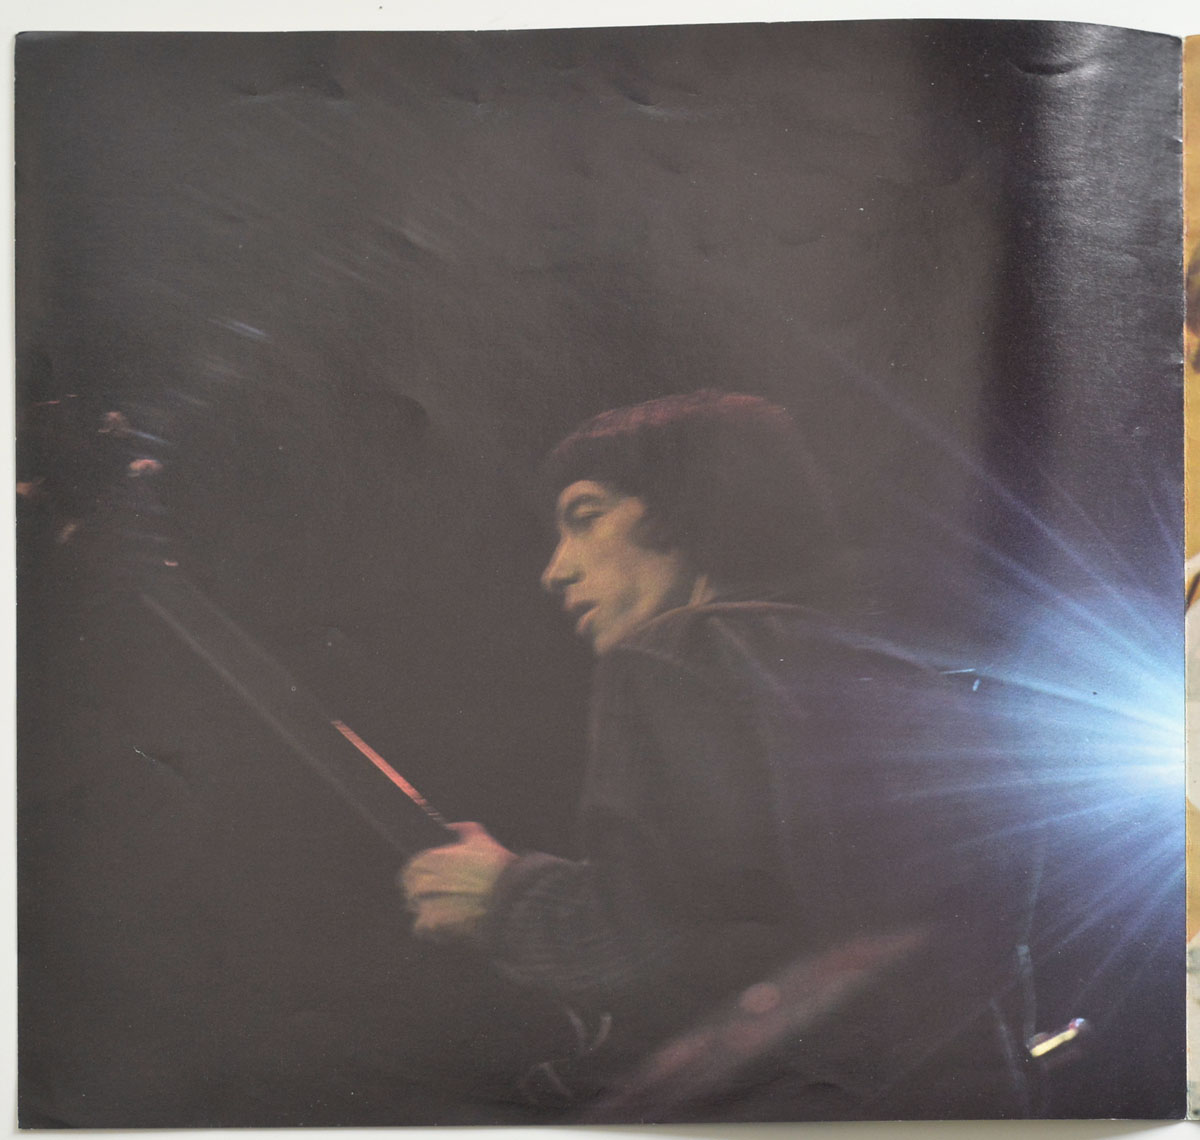 High Resolution Photo ROLLING STONES – Big Hits Booklet Photos Vinyl Record